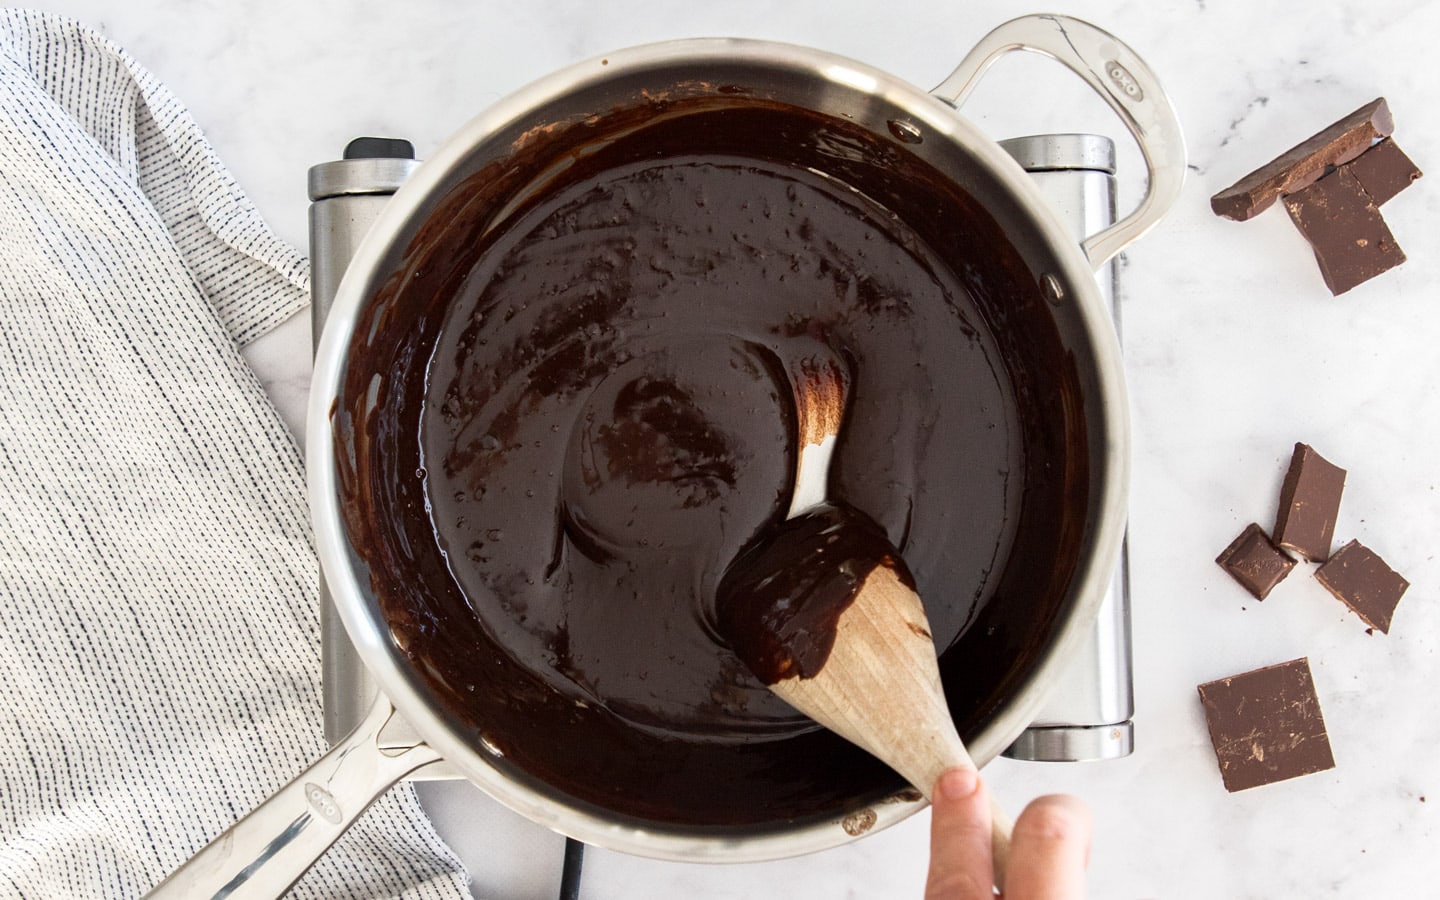 The chocolate and butter mixture in a pan.